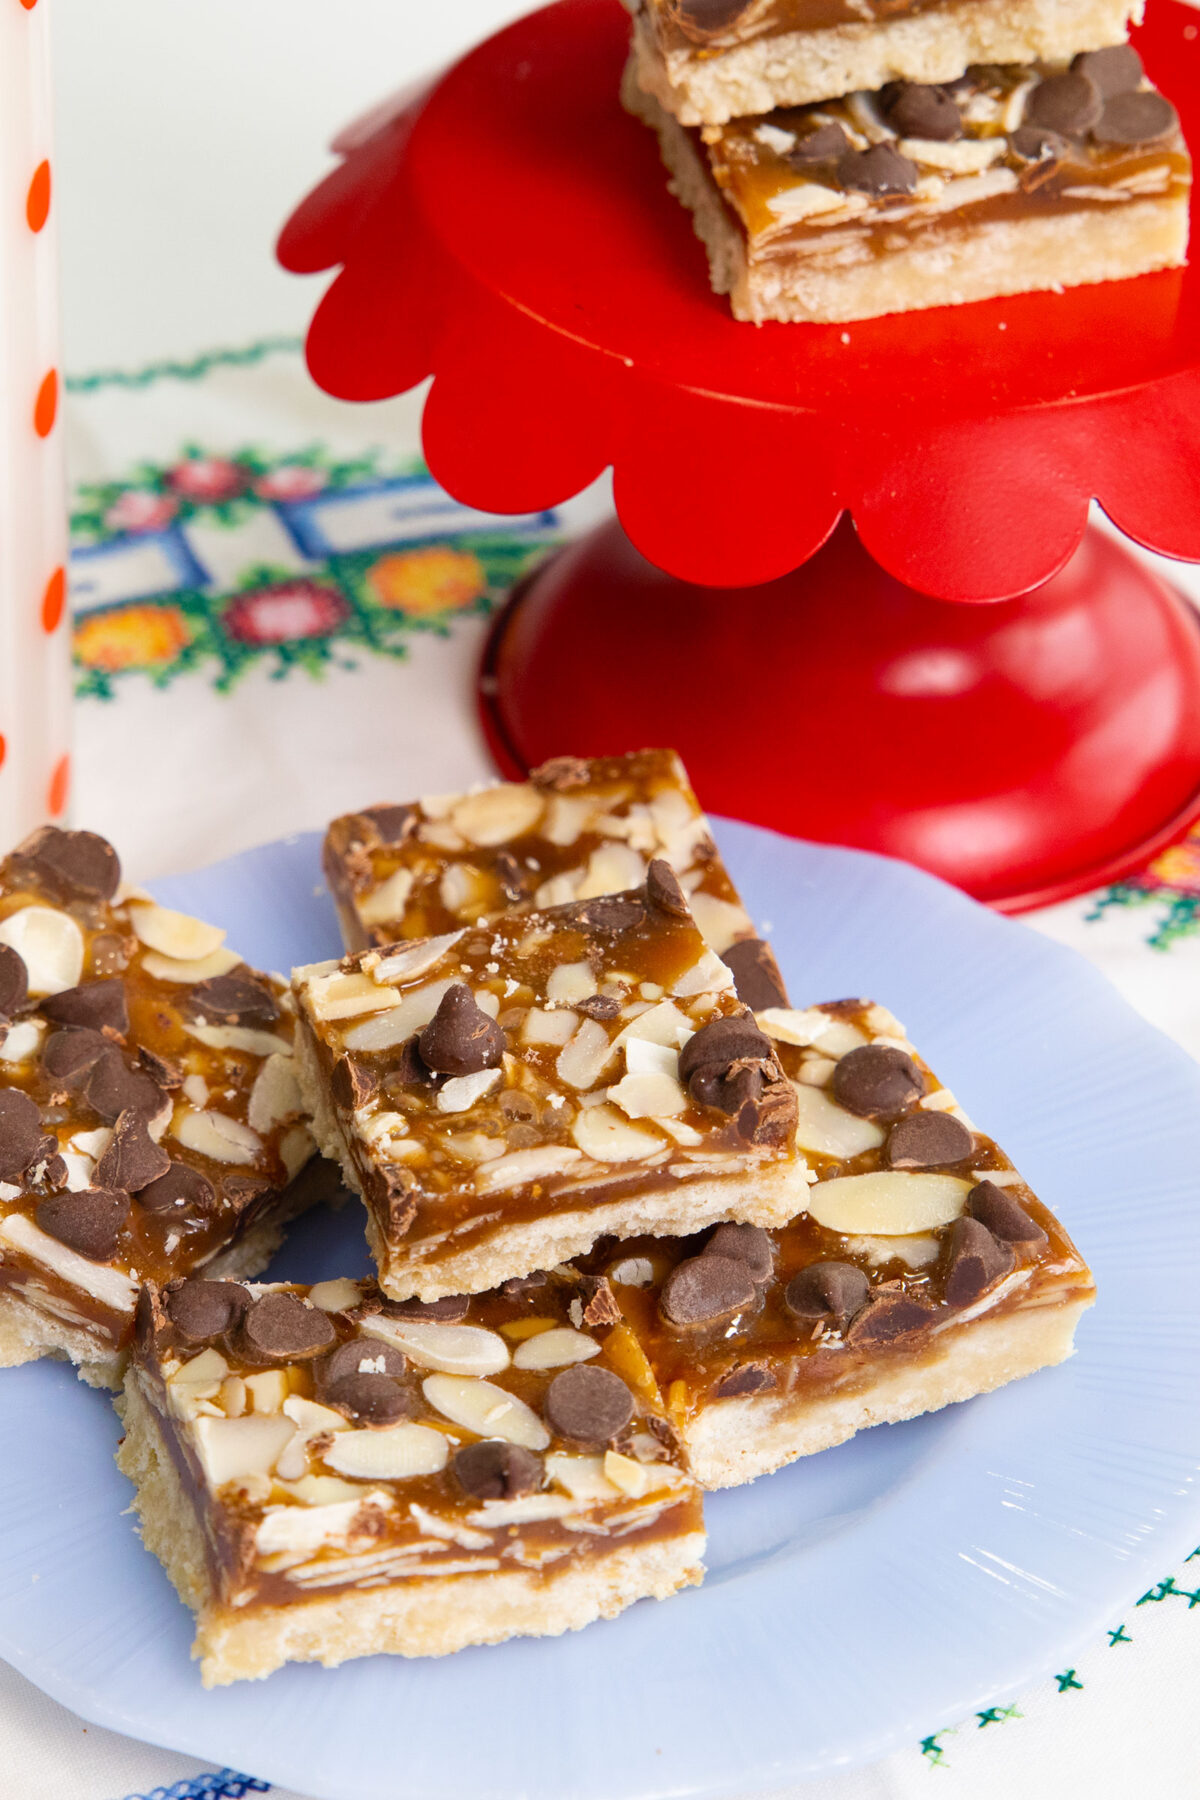 almond crunch toffee bars sliced into squares on a blue plate and ona red cake stand.